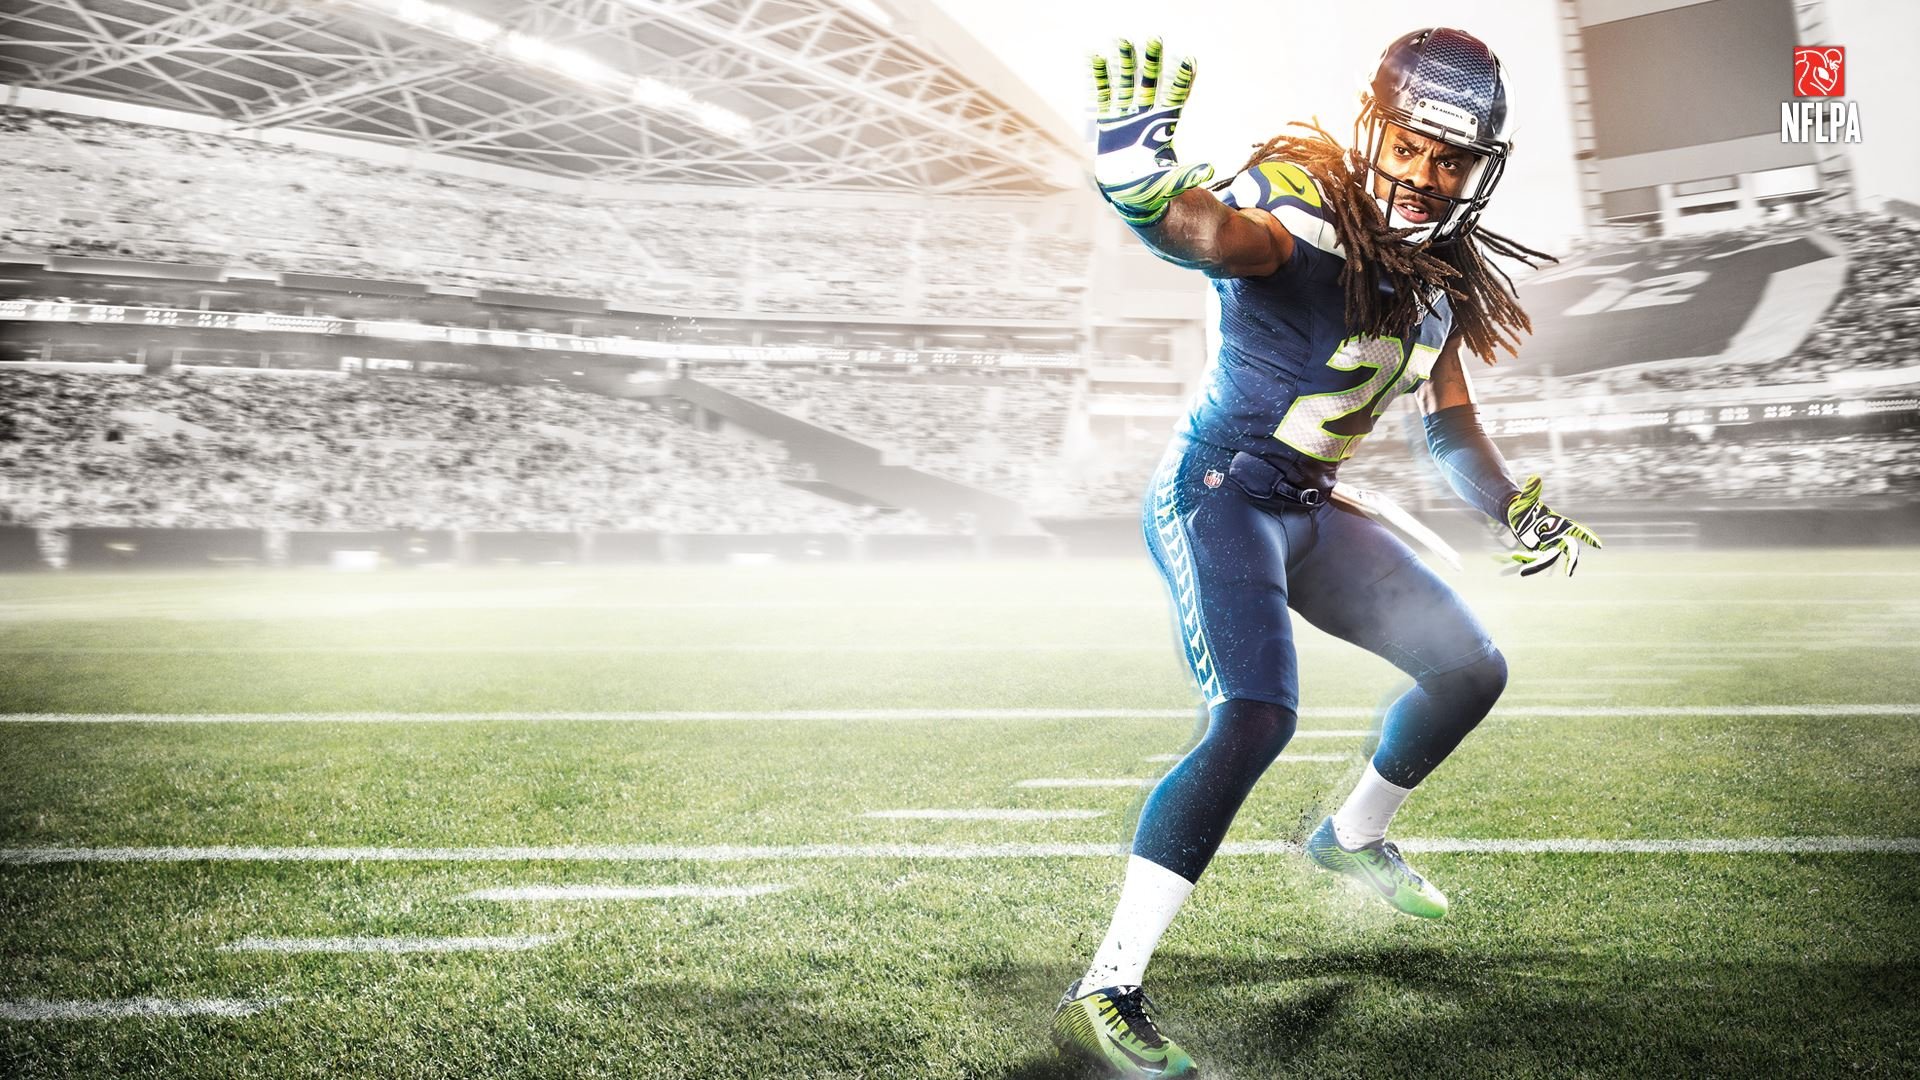 madden, Football, Nfl, Action, Sports, Strategy, Seattle, Seahawwks Wallpaper